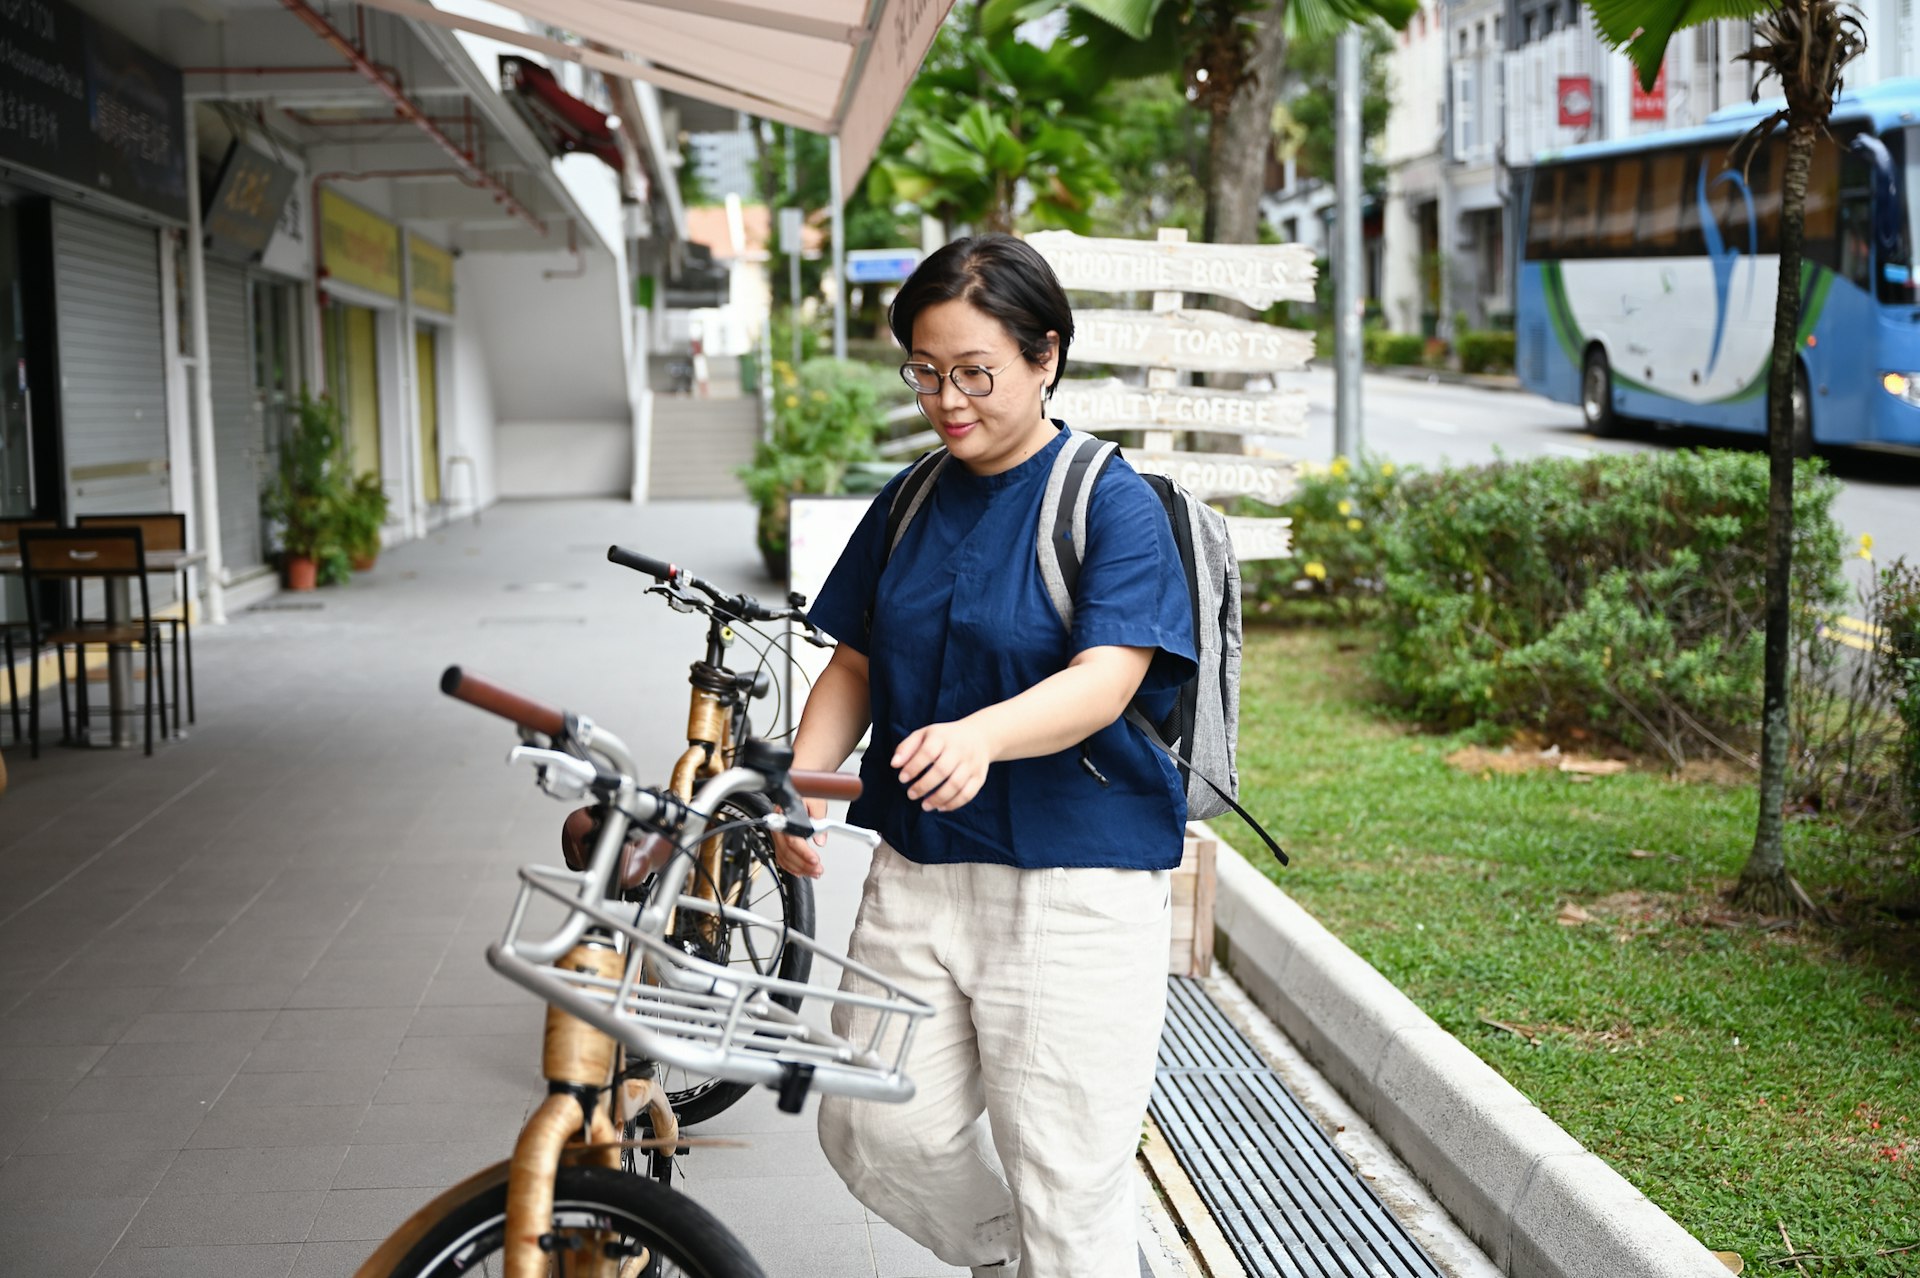 A woman with a backpack approaches a bicycle